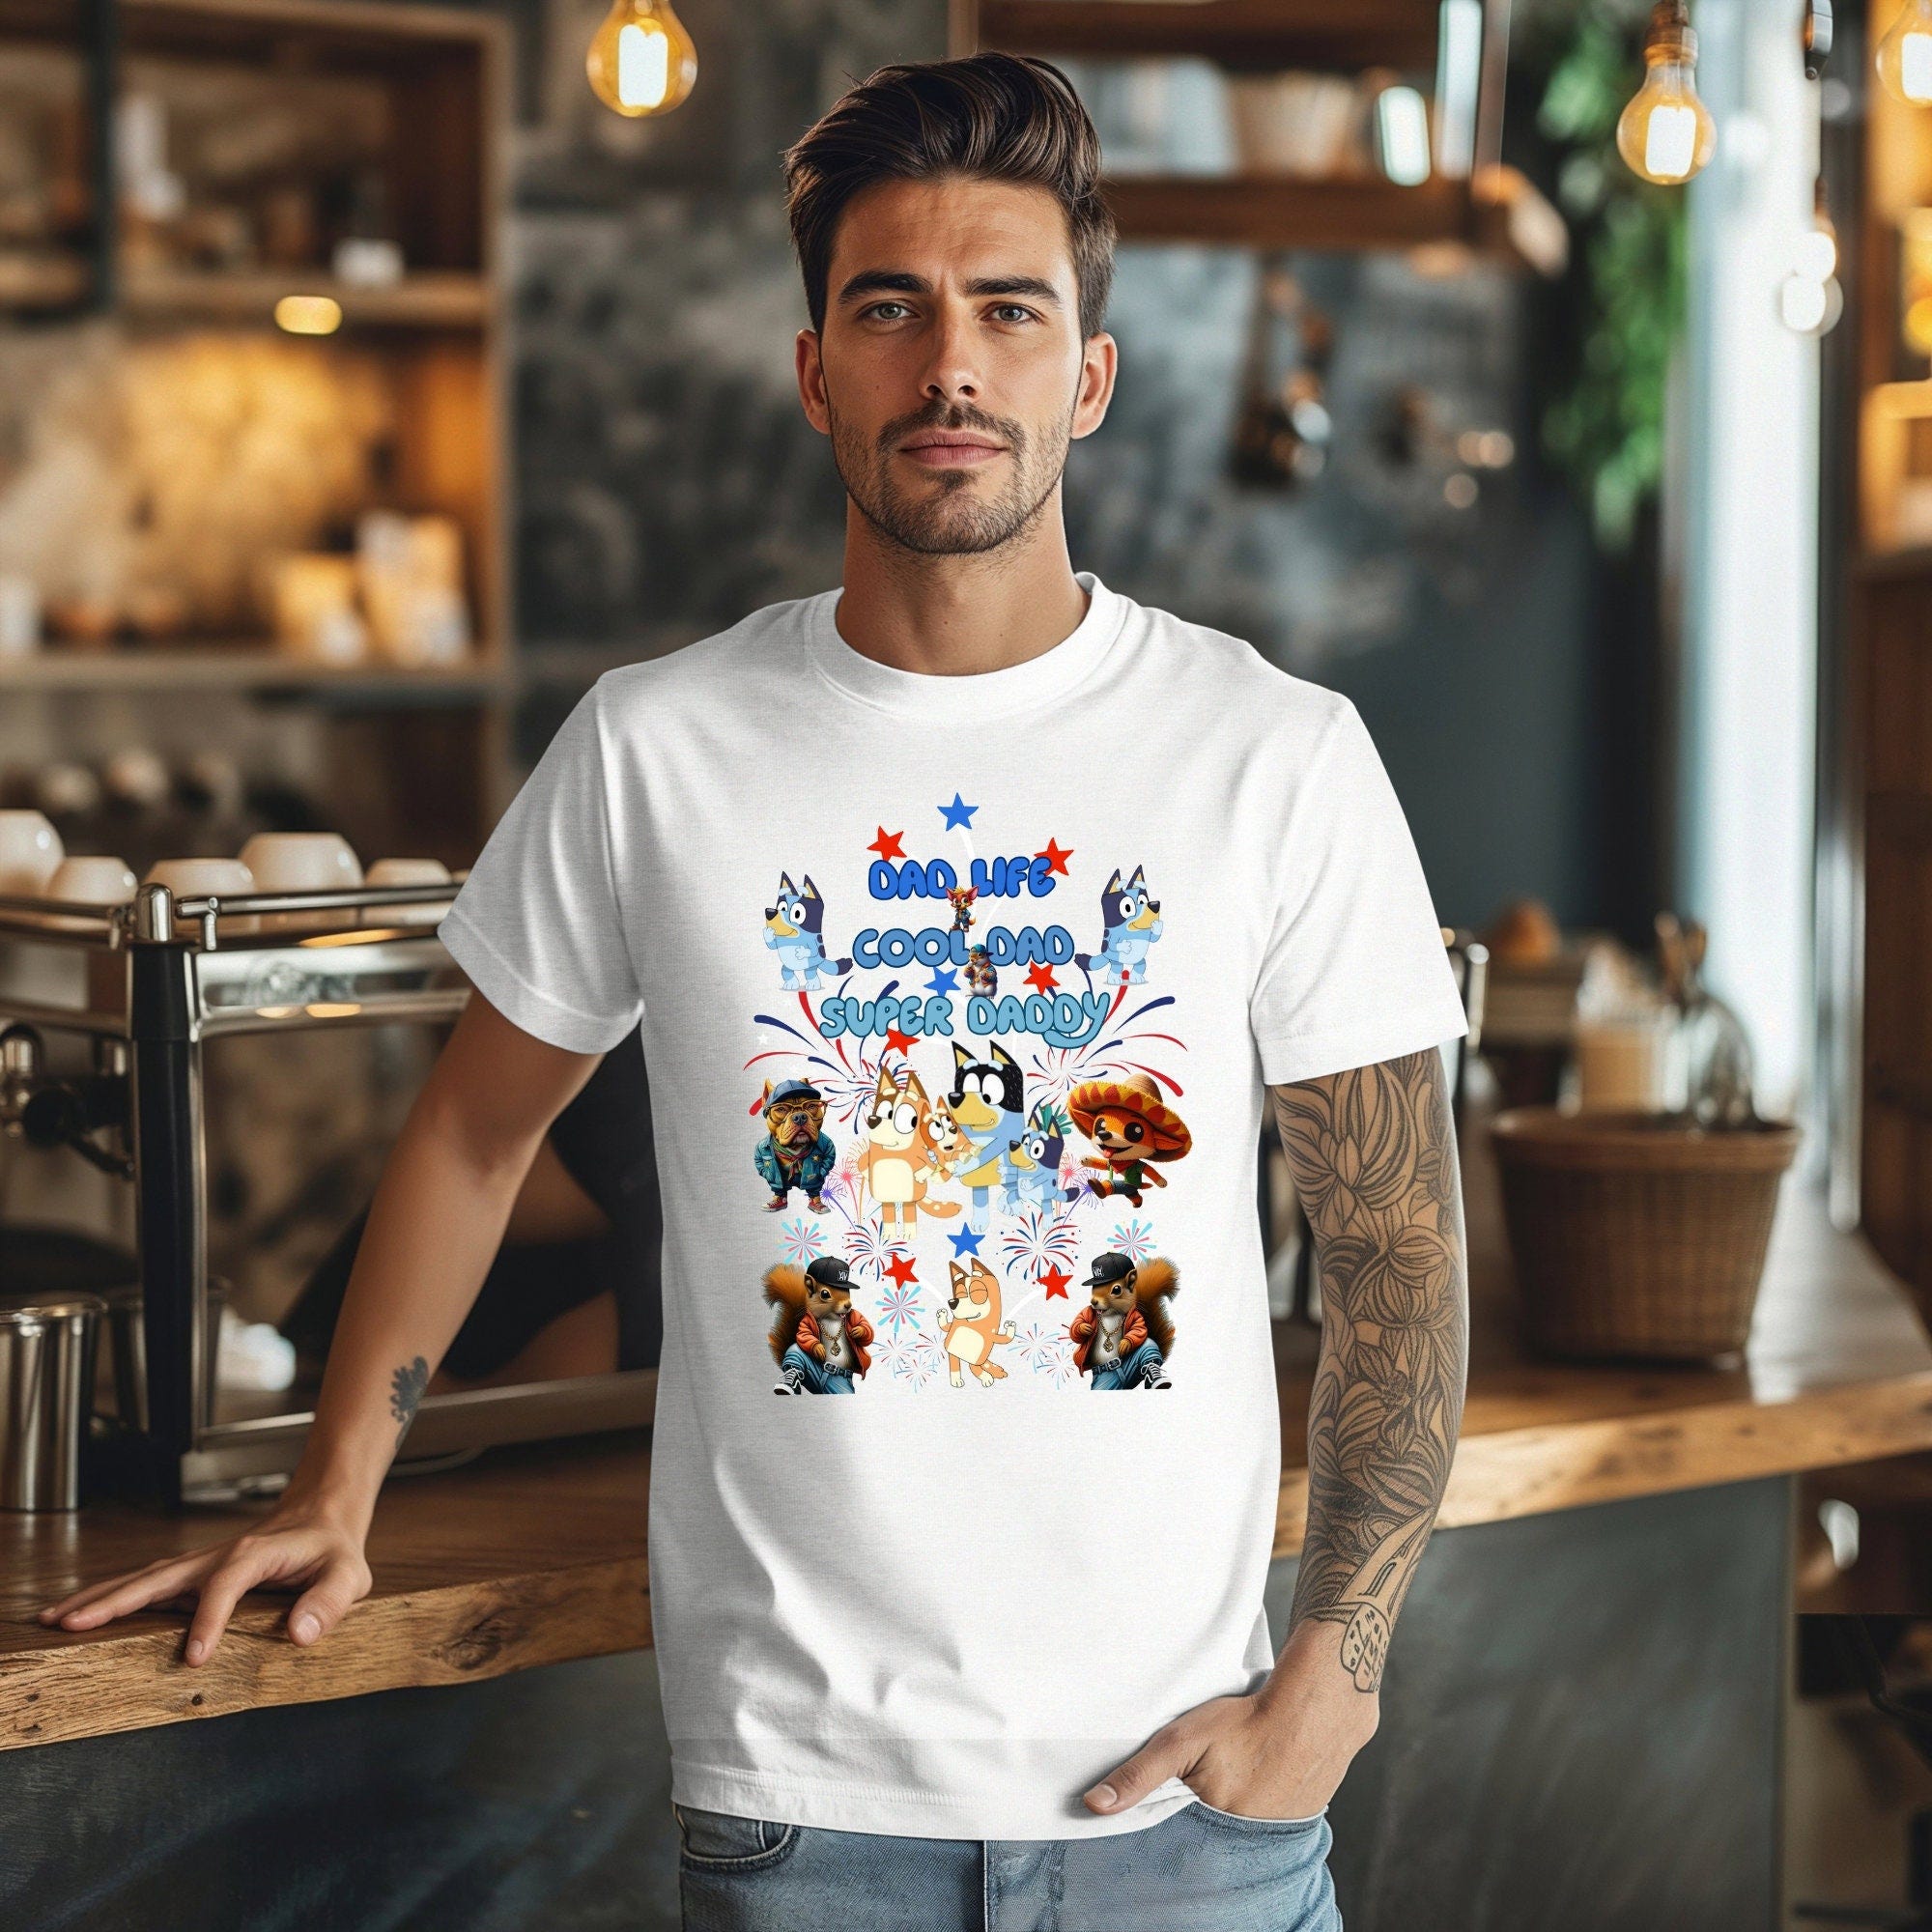 Chili Bluey and cartoon characters,Dad Life,Cool Dad, Super Dad Printed T-Shirt Perfect Gift for Dads